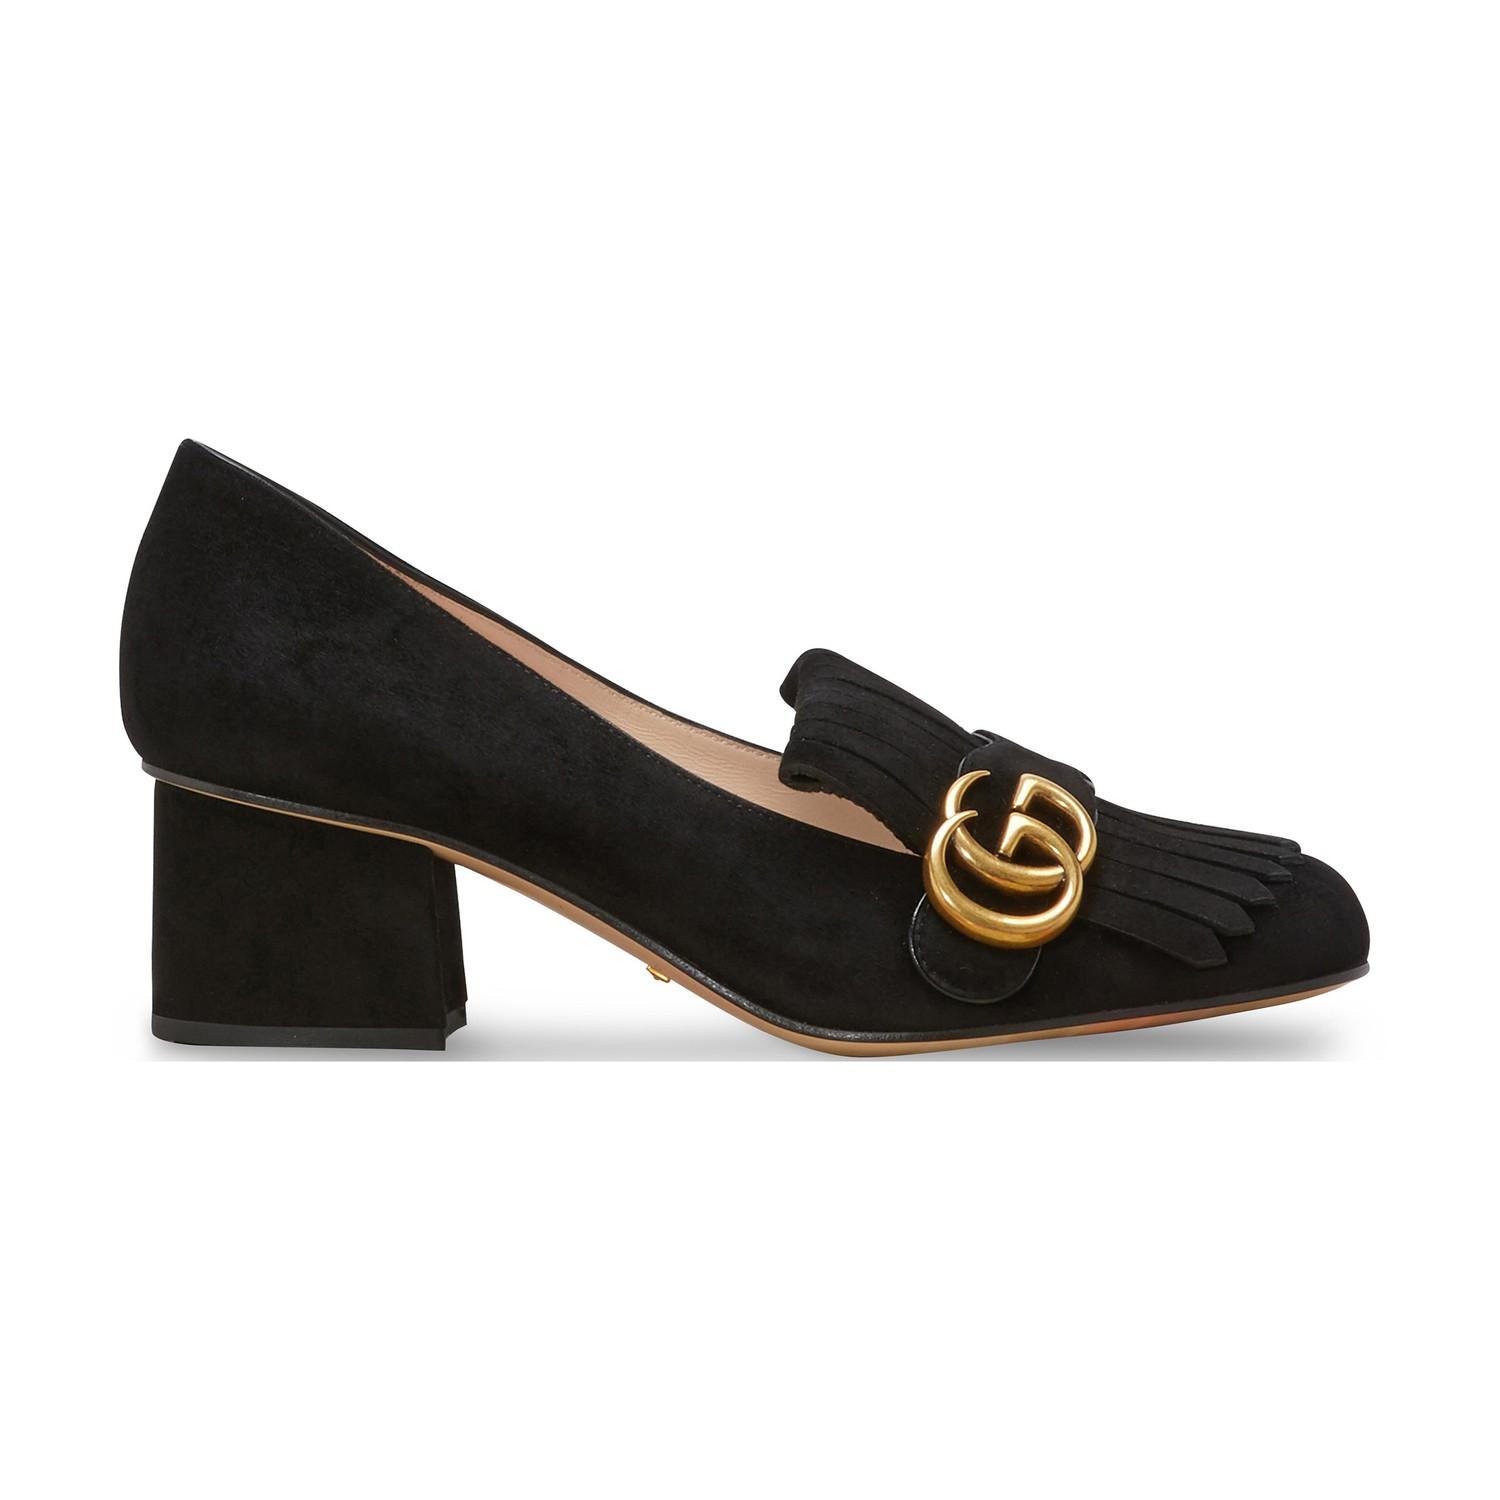 Gucci Leather Mid-Heel Marmont Pump in Black - Save 39% - Lyst